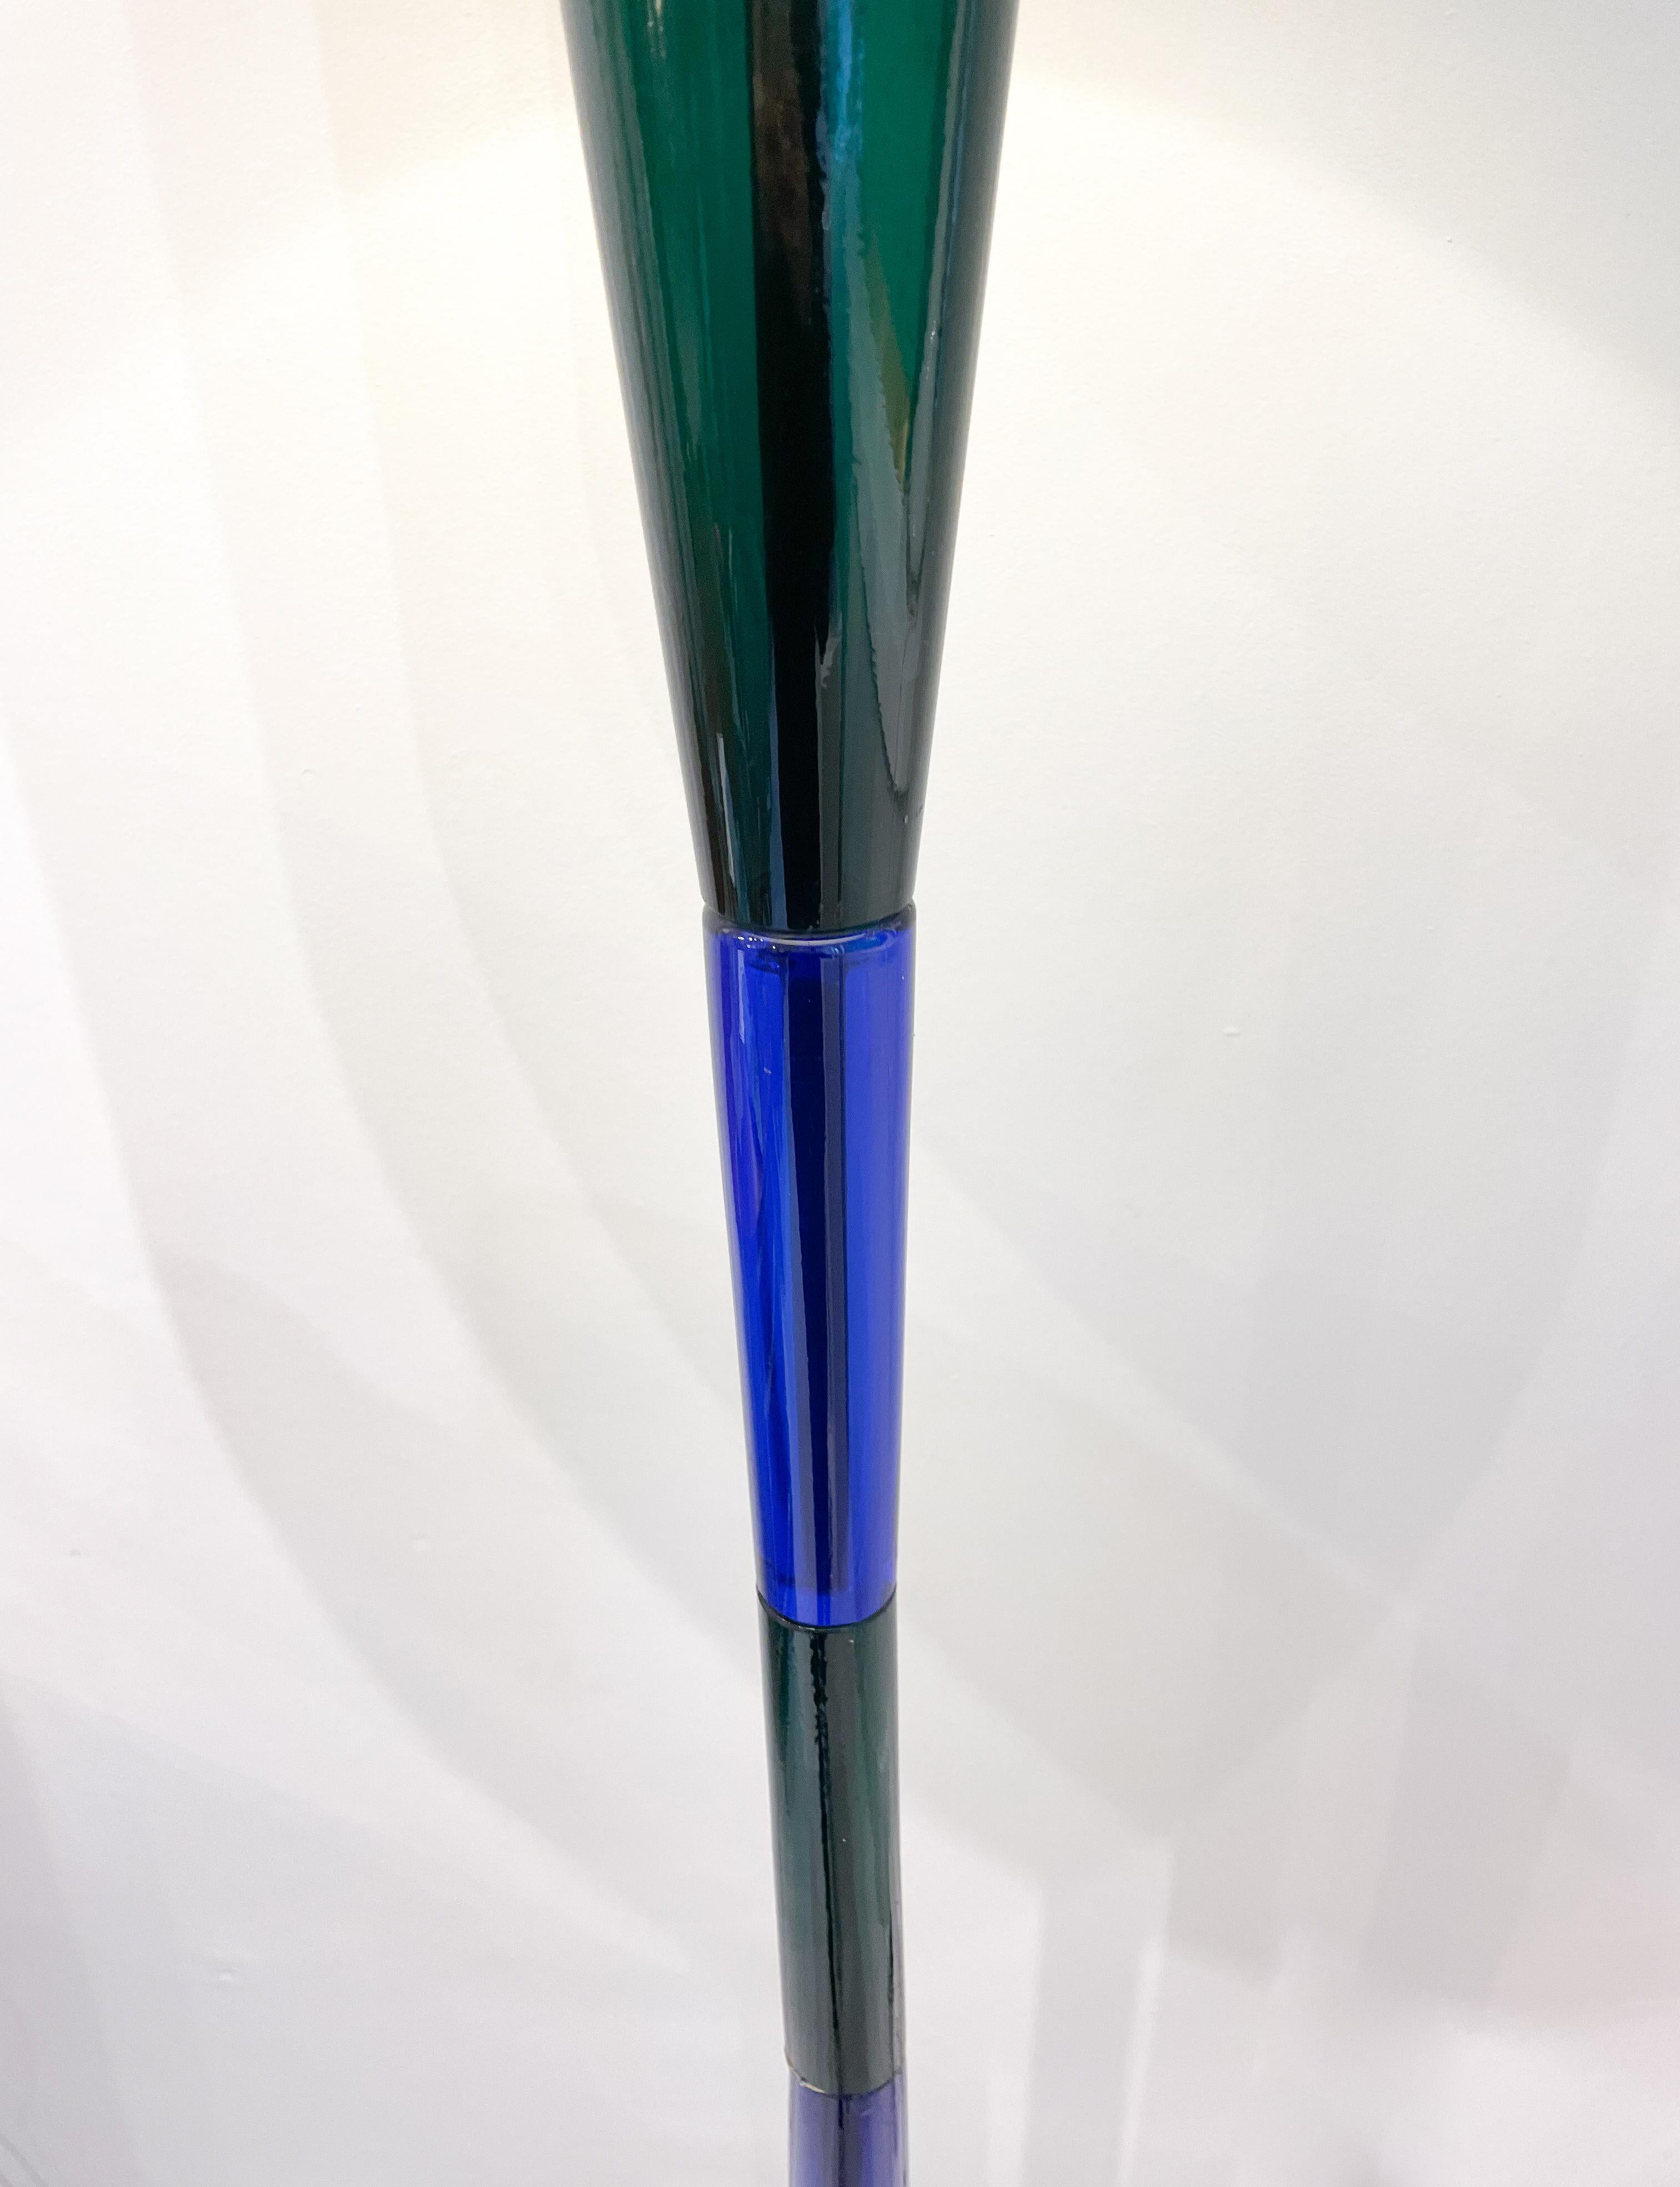 Mid-Century Modern Mid-Century Blue and Green Murano Glass Floor lamp by Fulvio Bianconi, 1950s For Sale